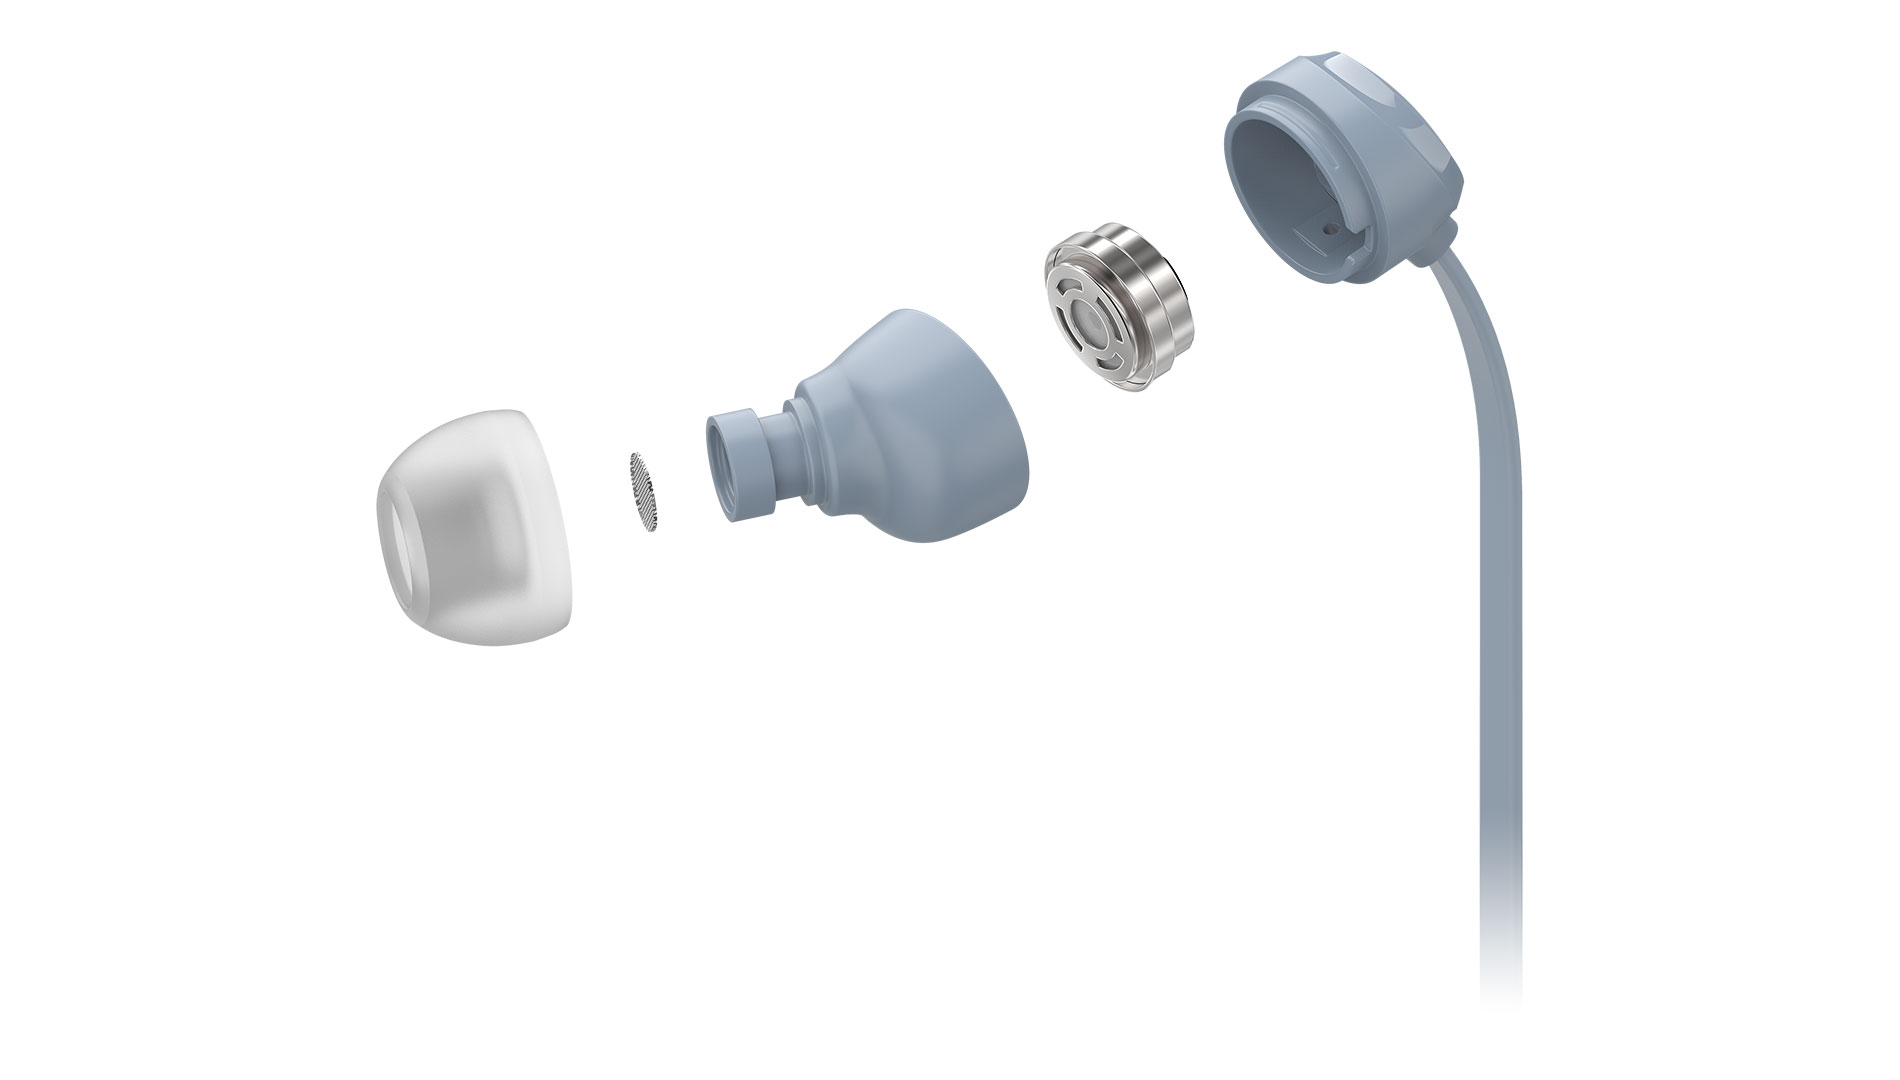 In-ear headphones Earbuds 3-S in blue with high quality speaker drivers - product image